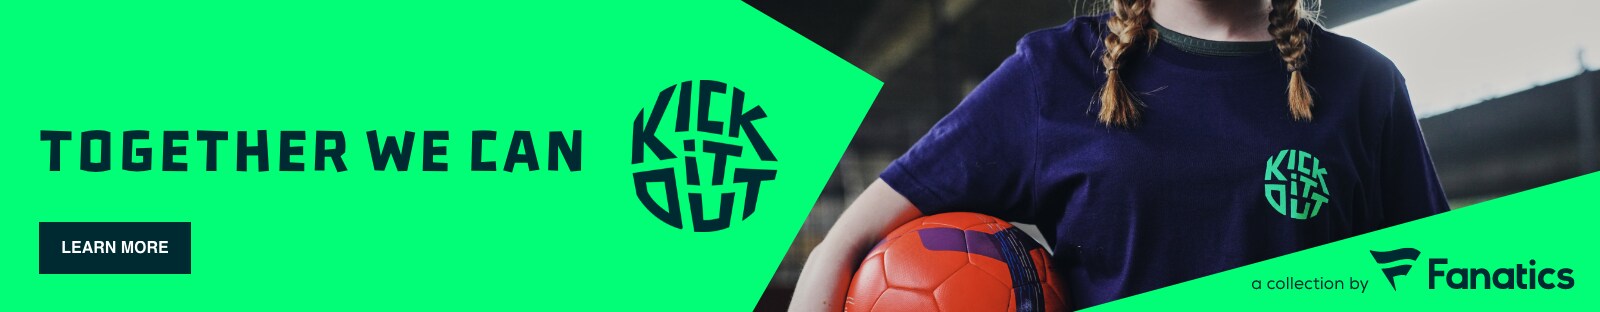 KICK IT OUT. LEARN MORE